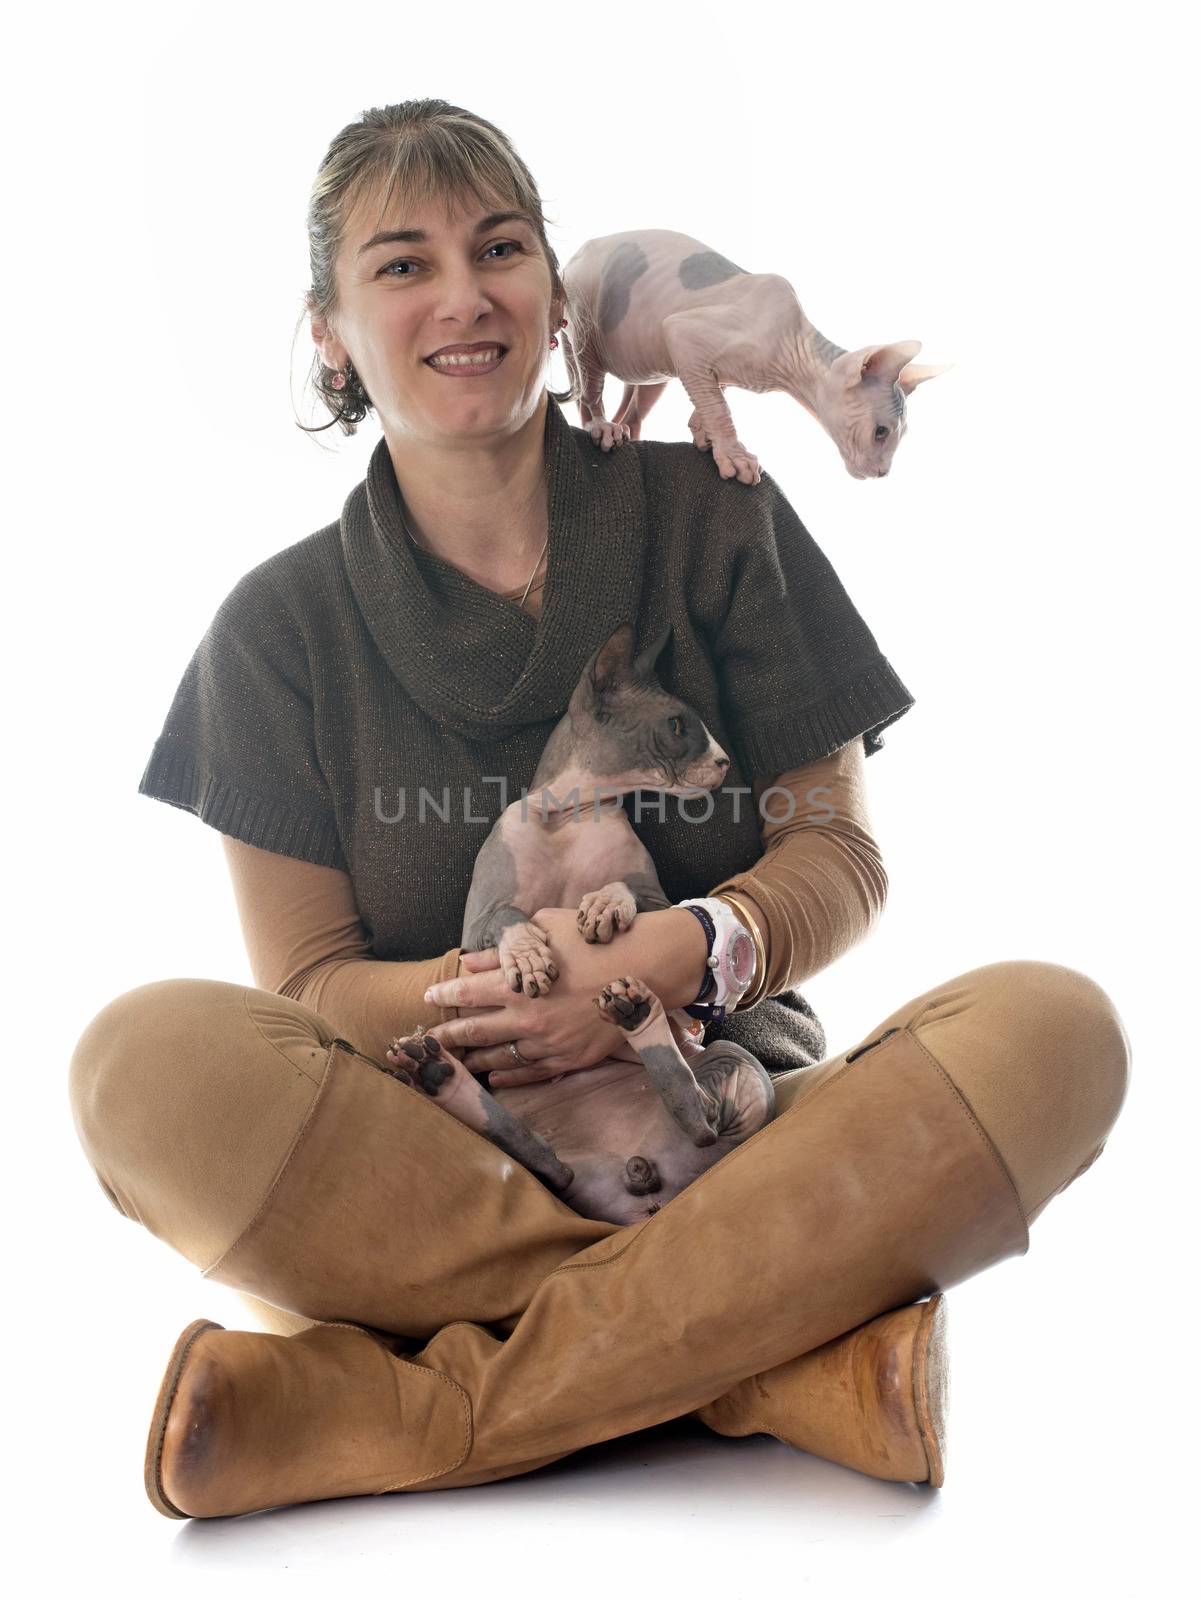 Sphynx Hairless Cat and woman in front of white background